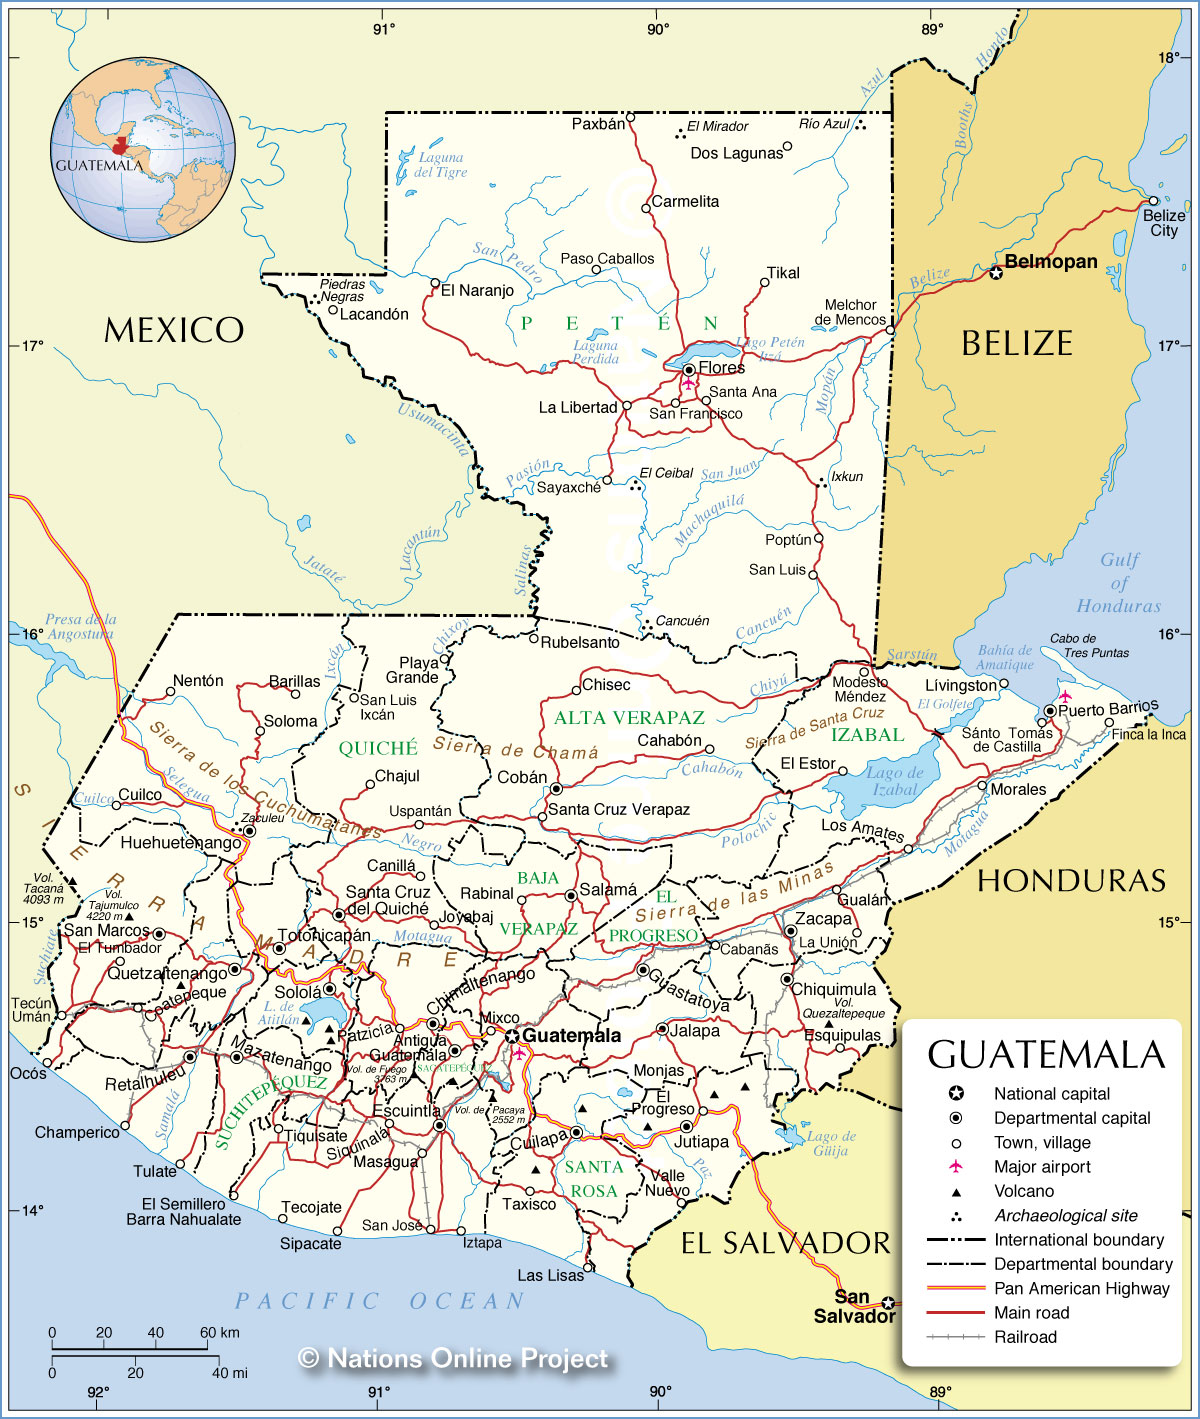 Administrative Map of Guatemala - Nations Online Project